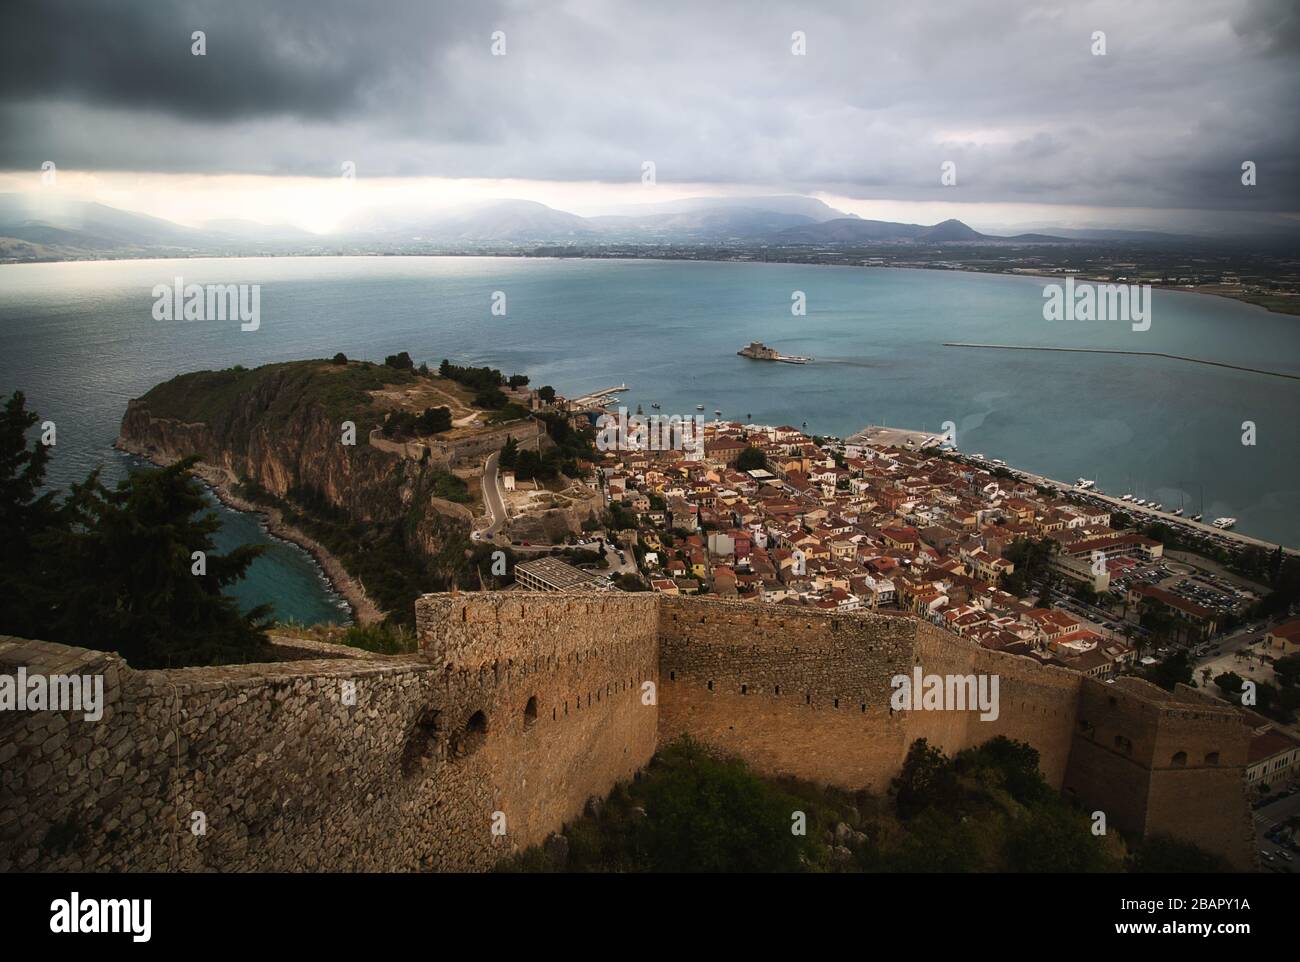 Old town of Nafplion in Greece, view from above with tiled roofs, small port and Bourtzi castle on the Mediterranean sea water Stock Photo